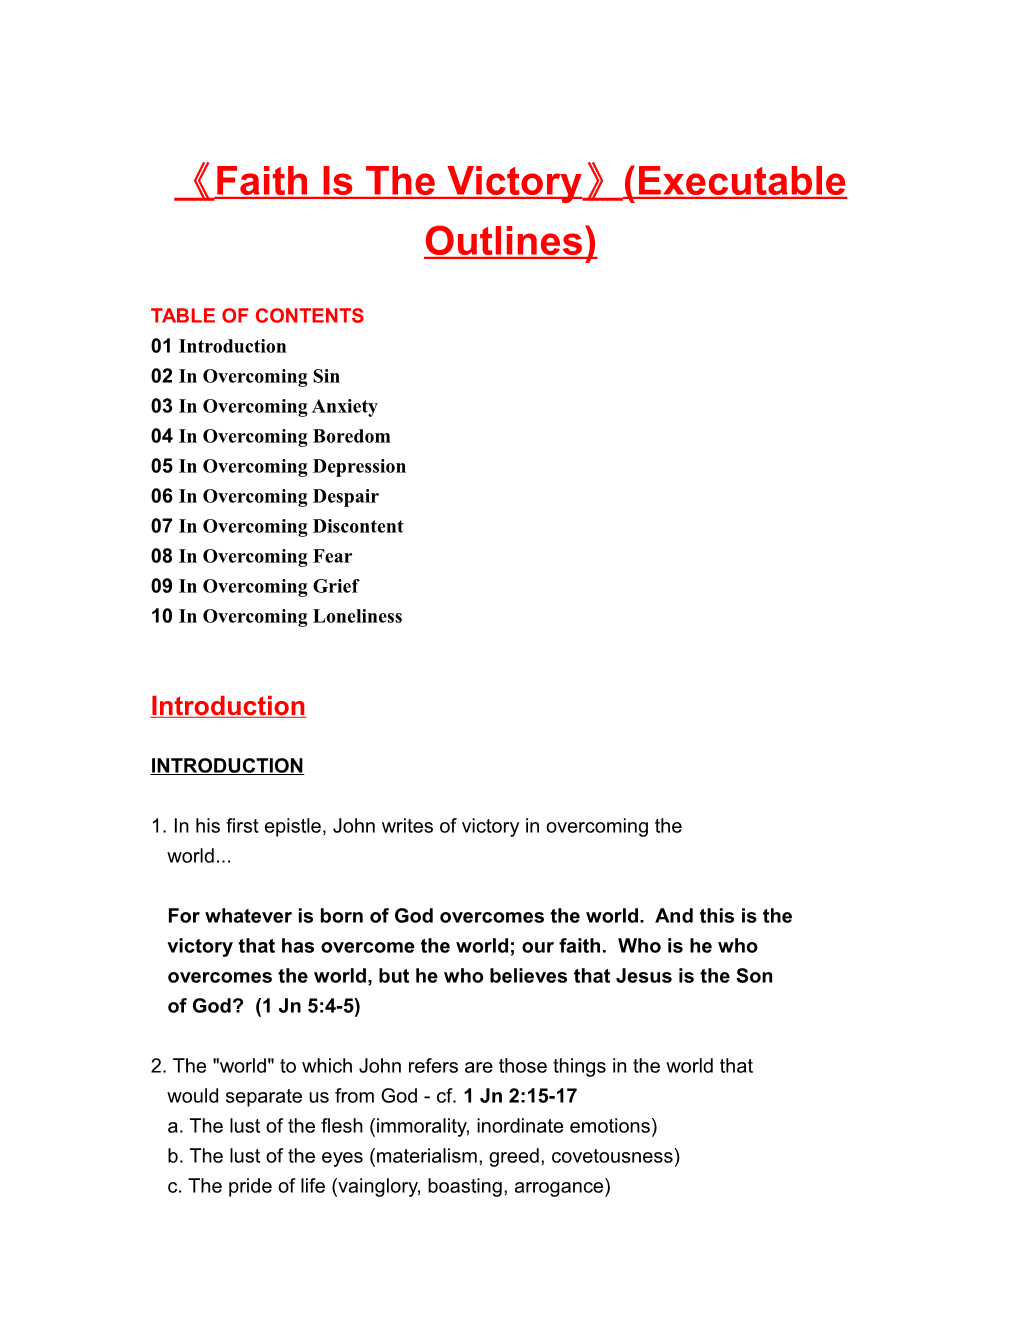 Faith Is the Victory (Executable Outlines)